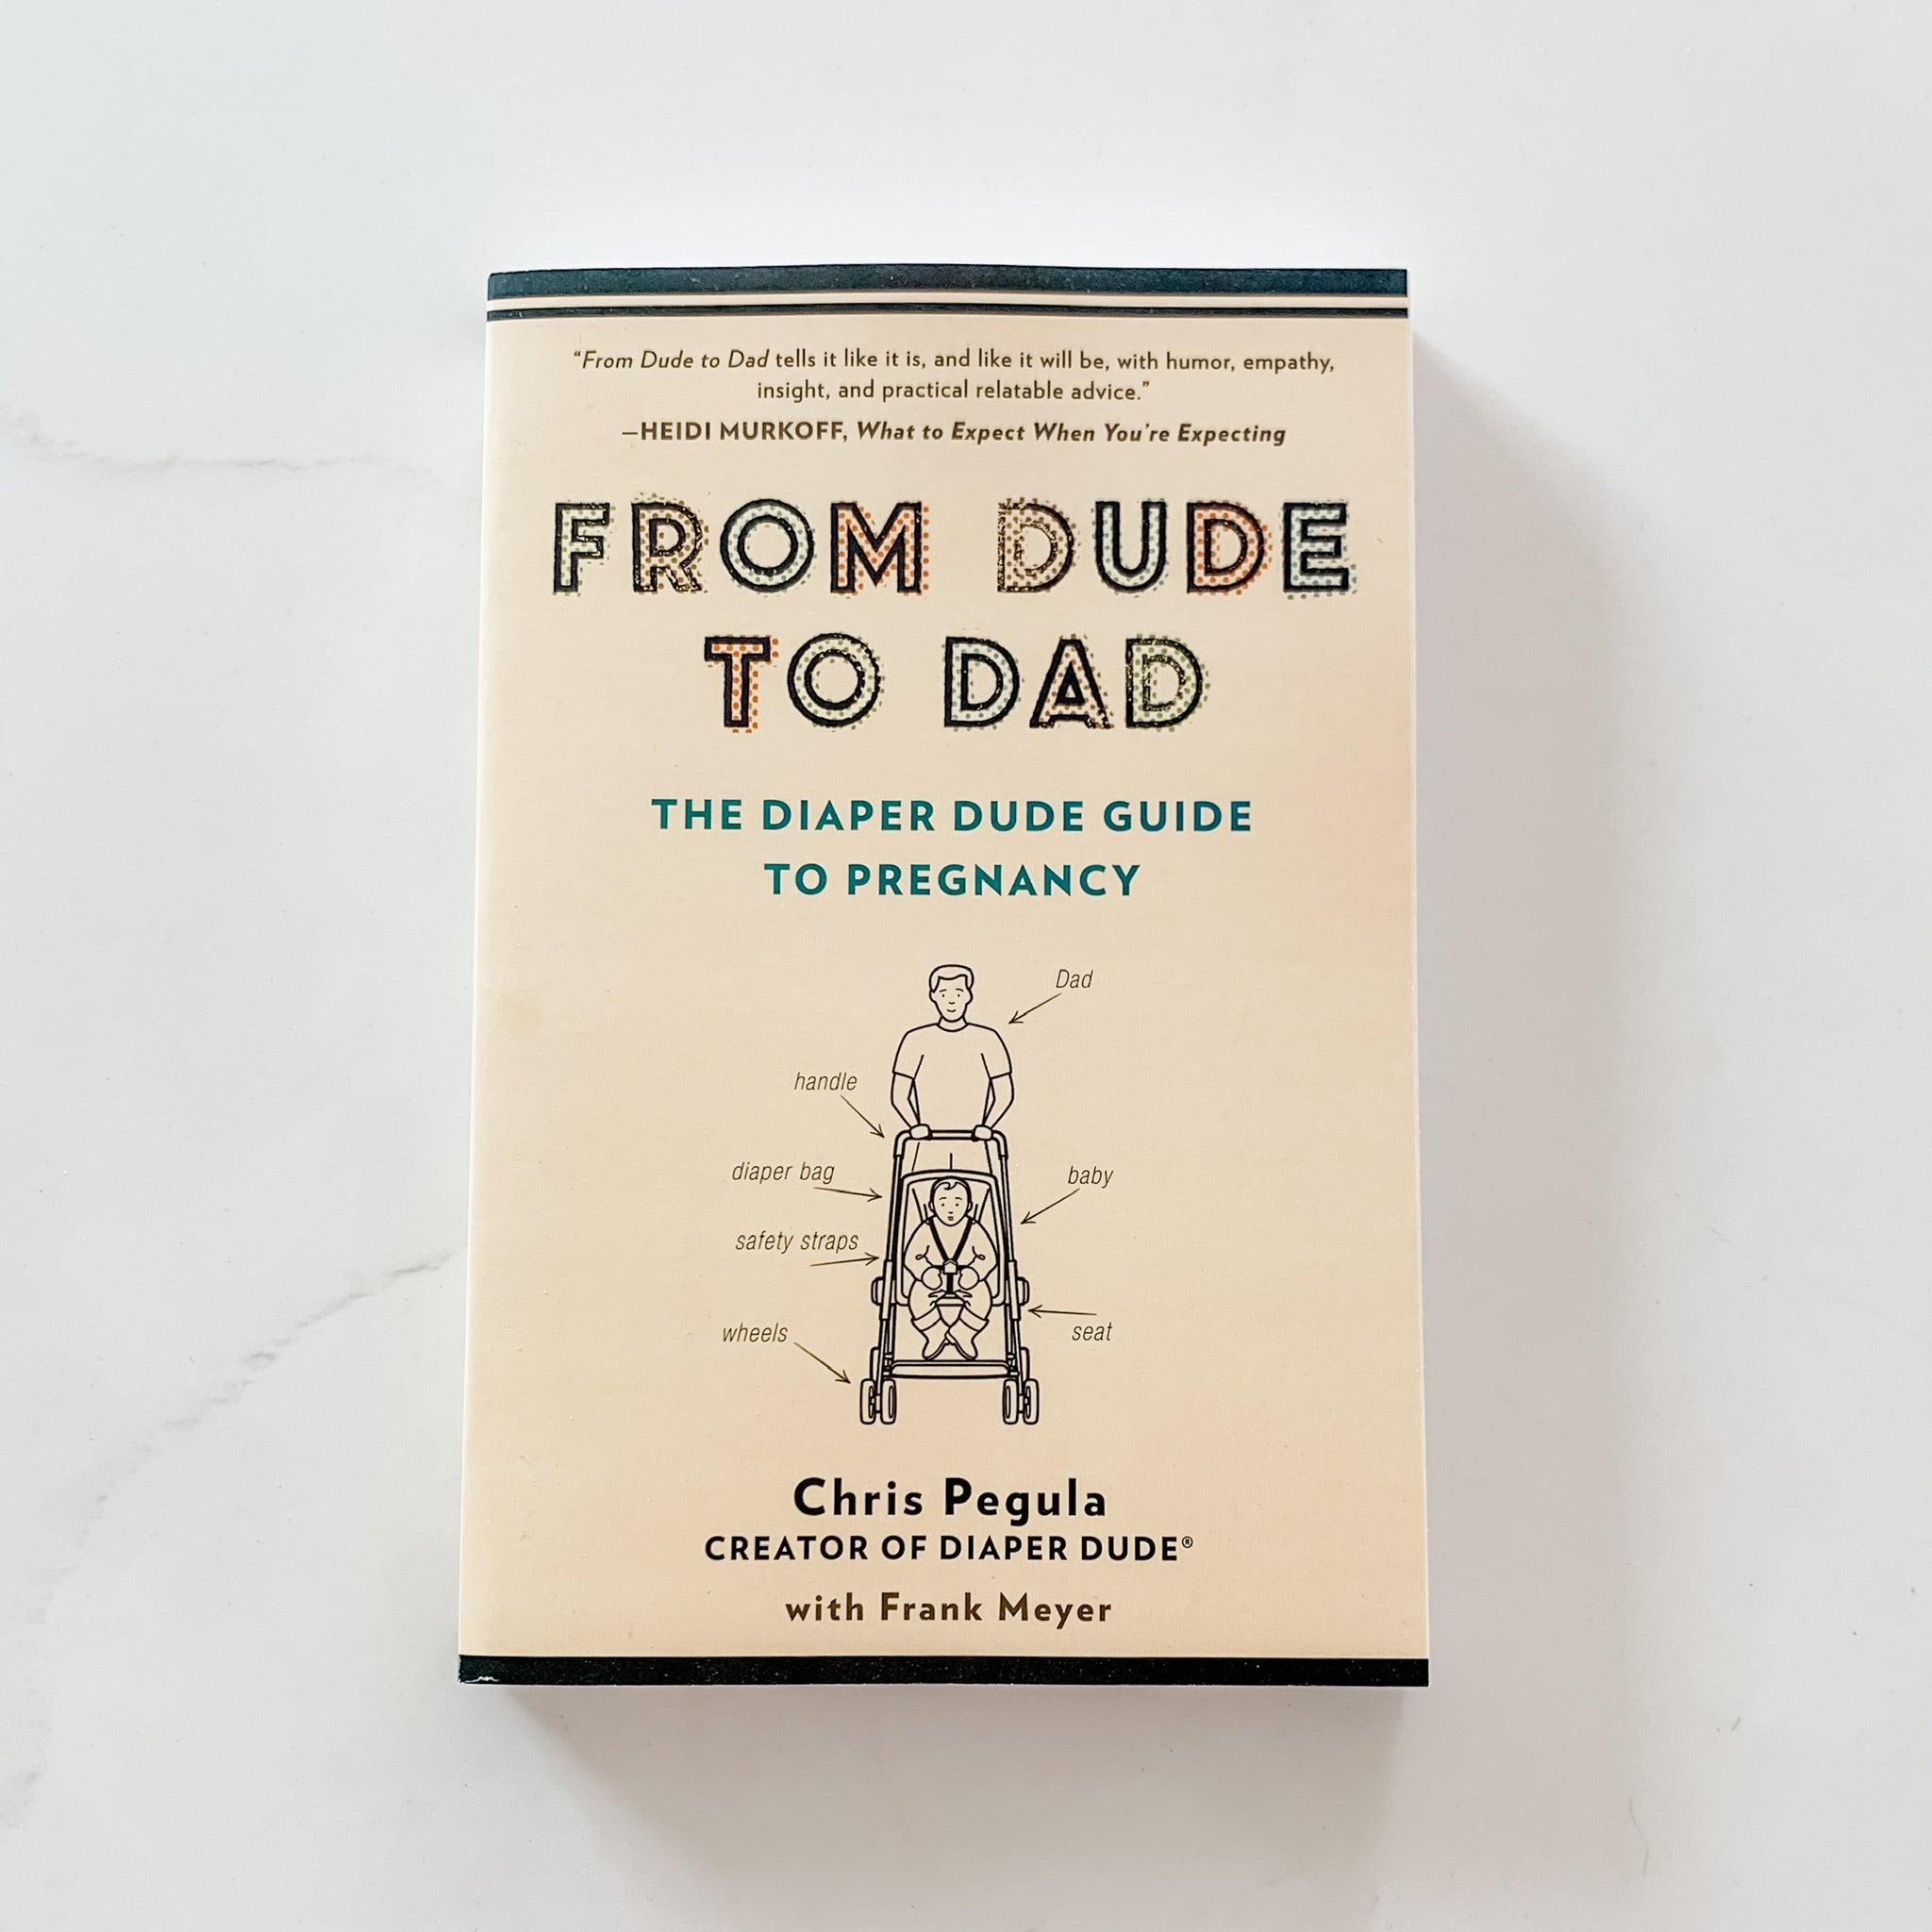 From Dude to Dad